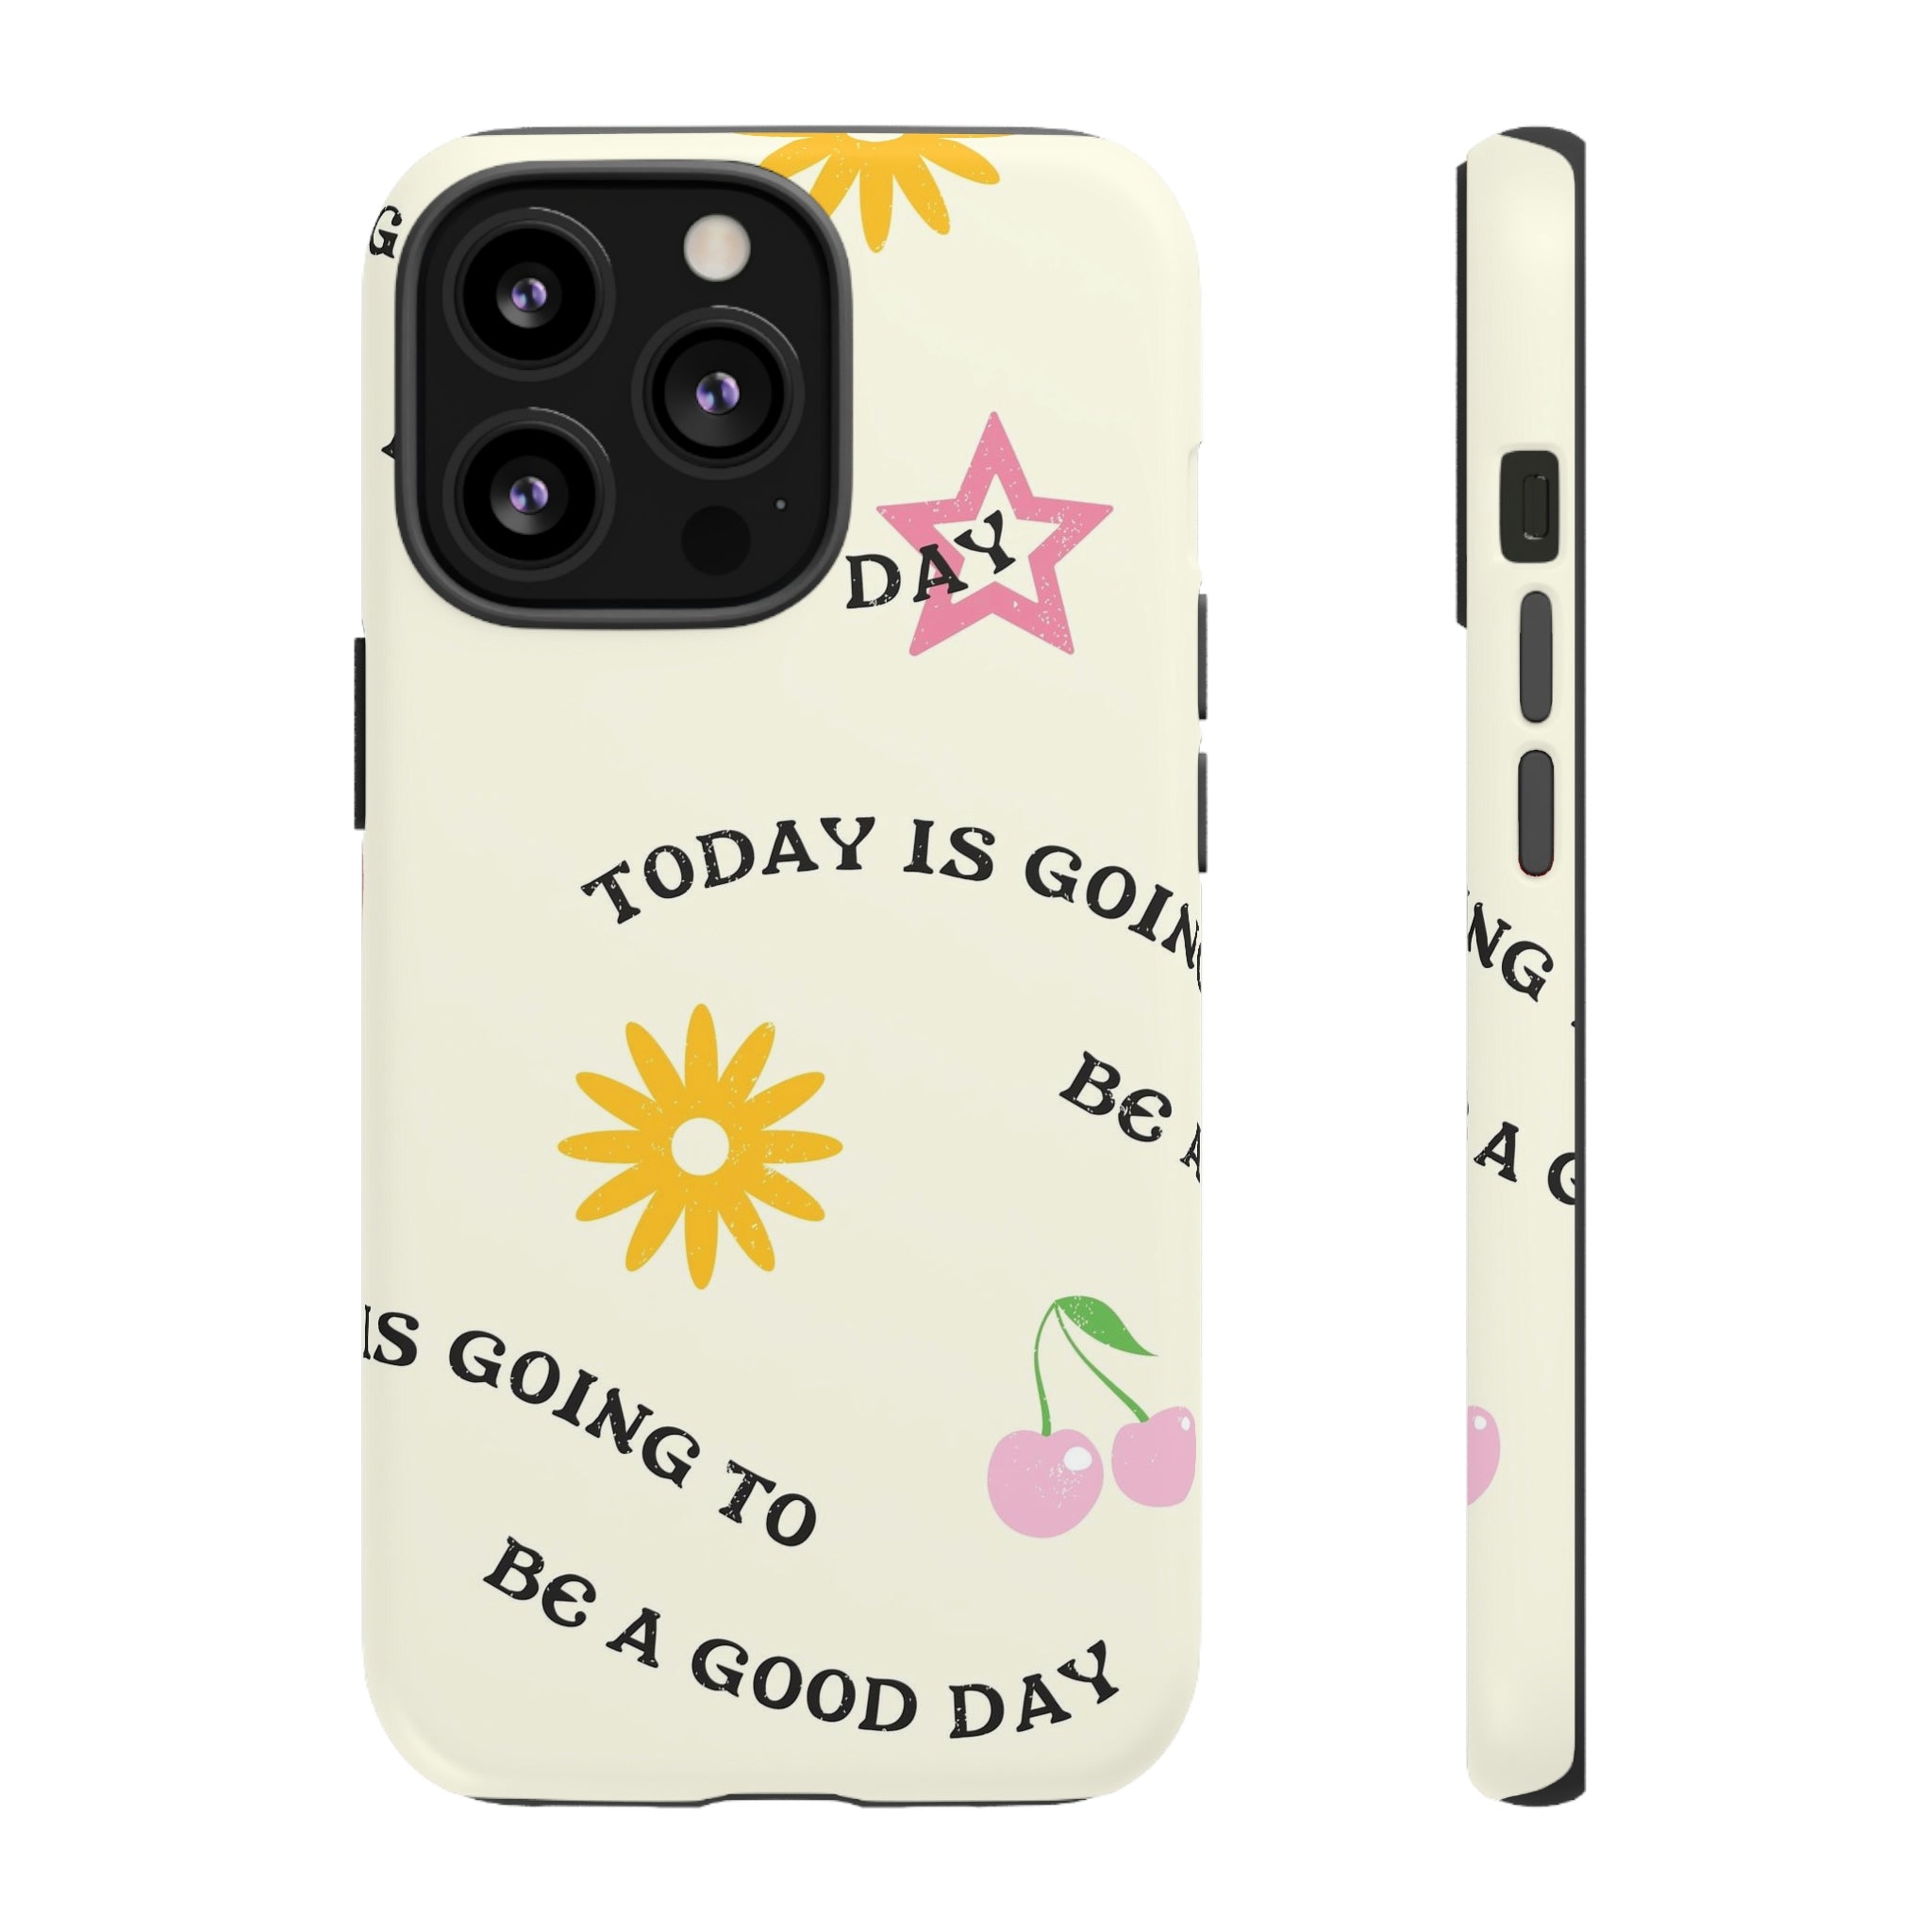 Today is Going To Be a Good Day Phone Case - Time's Reel